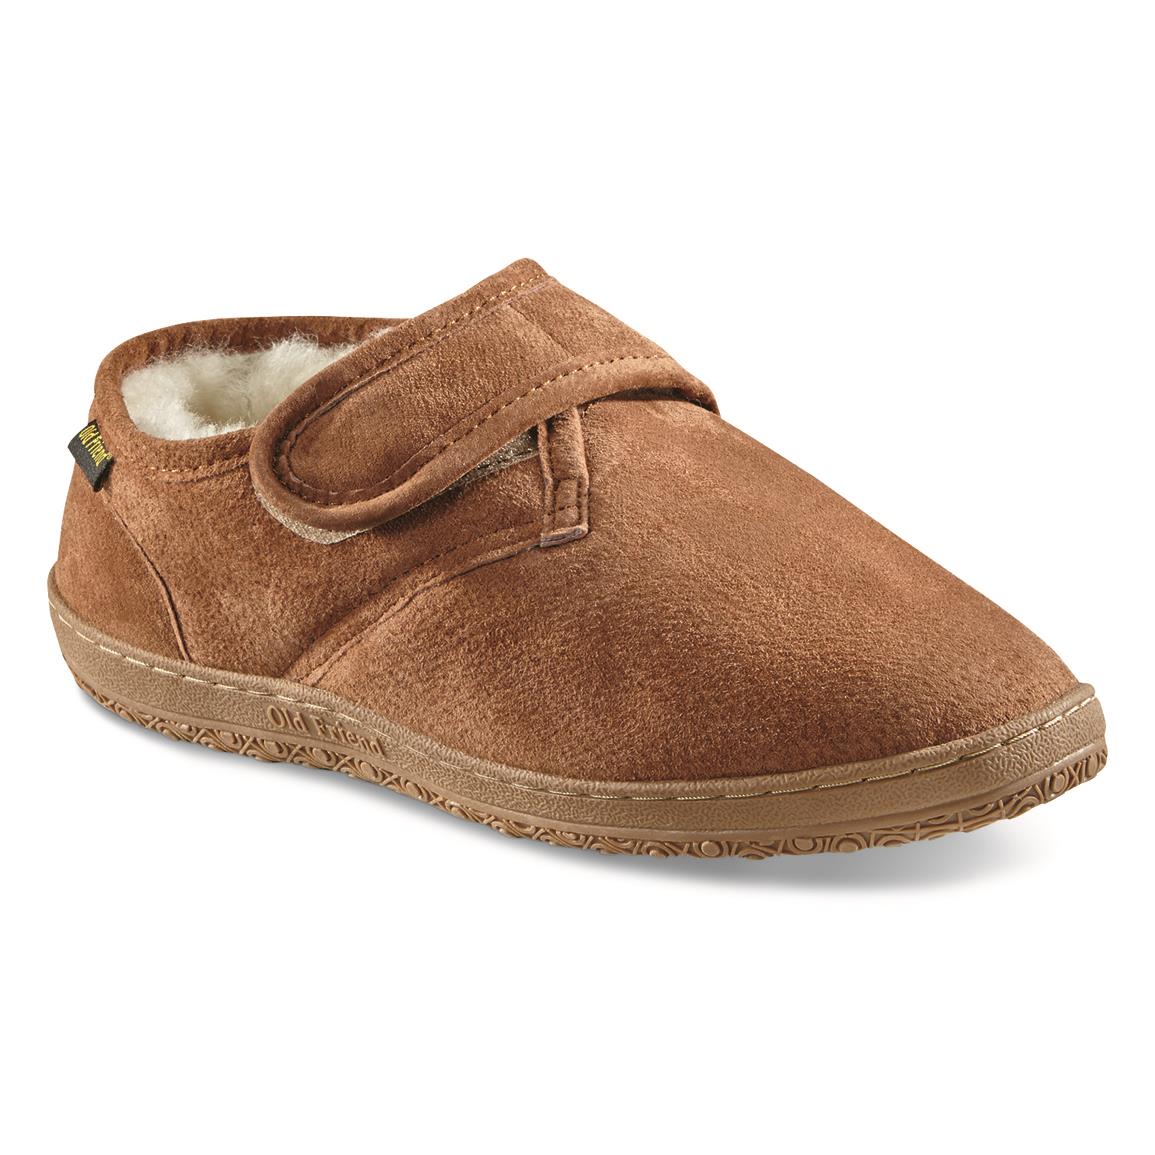 Old Friend Men's Adjustable Closure Bootee Slippers, Chestnut